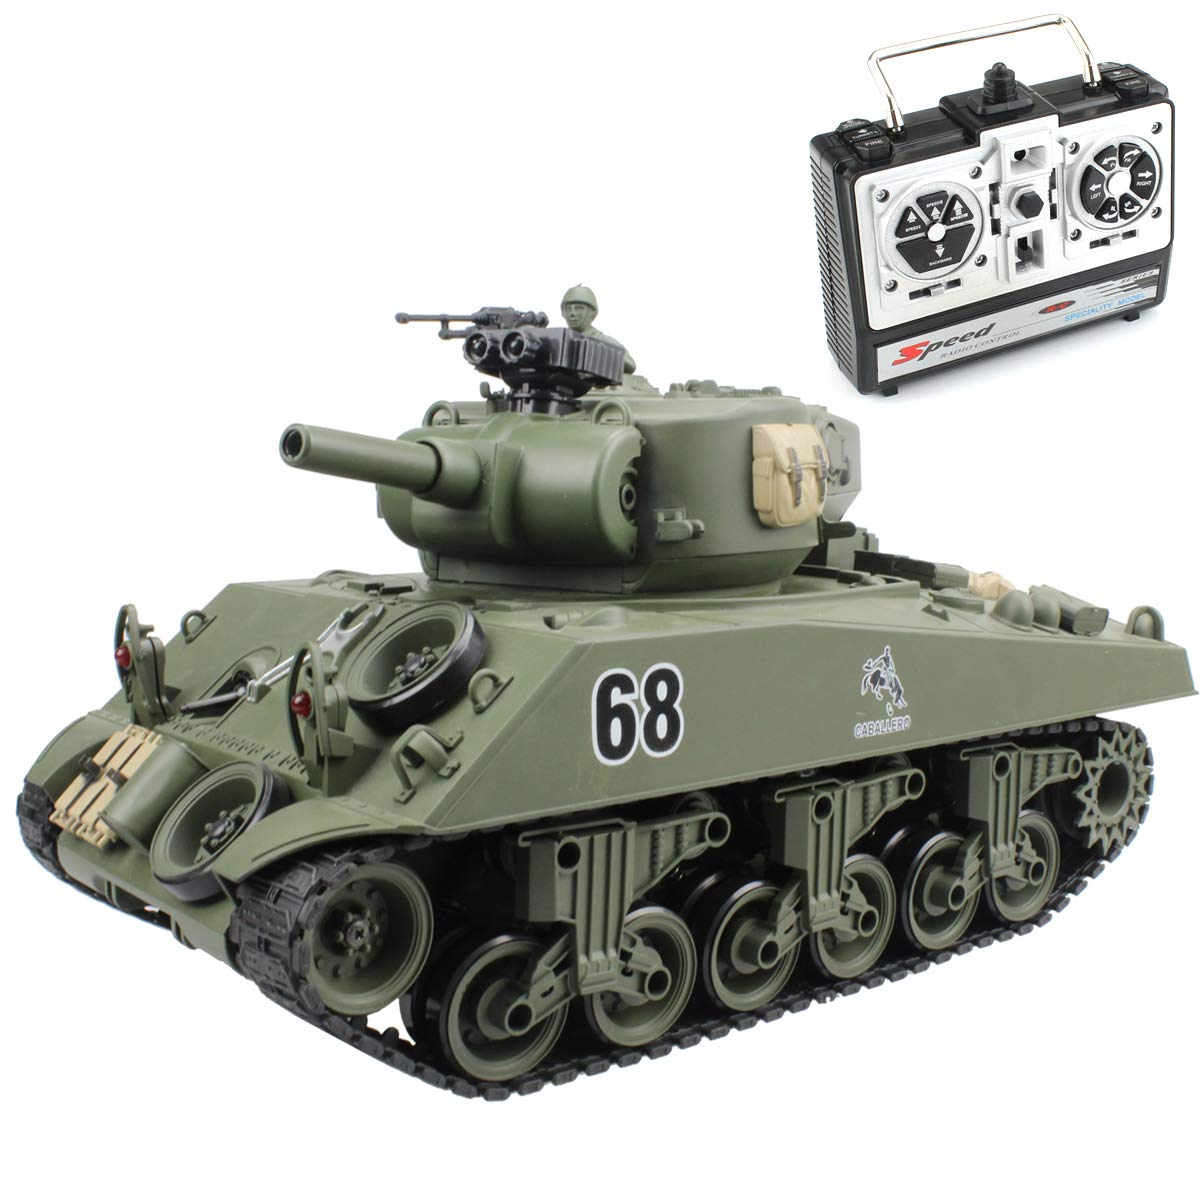 Top 9 Best Remote Control Tanks Battle Reviews in 2022 6